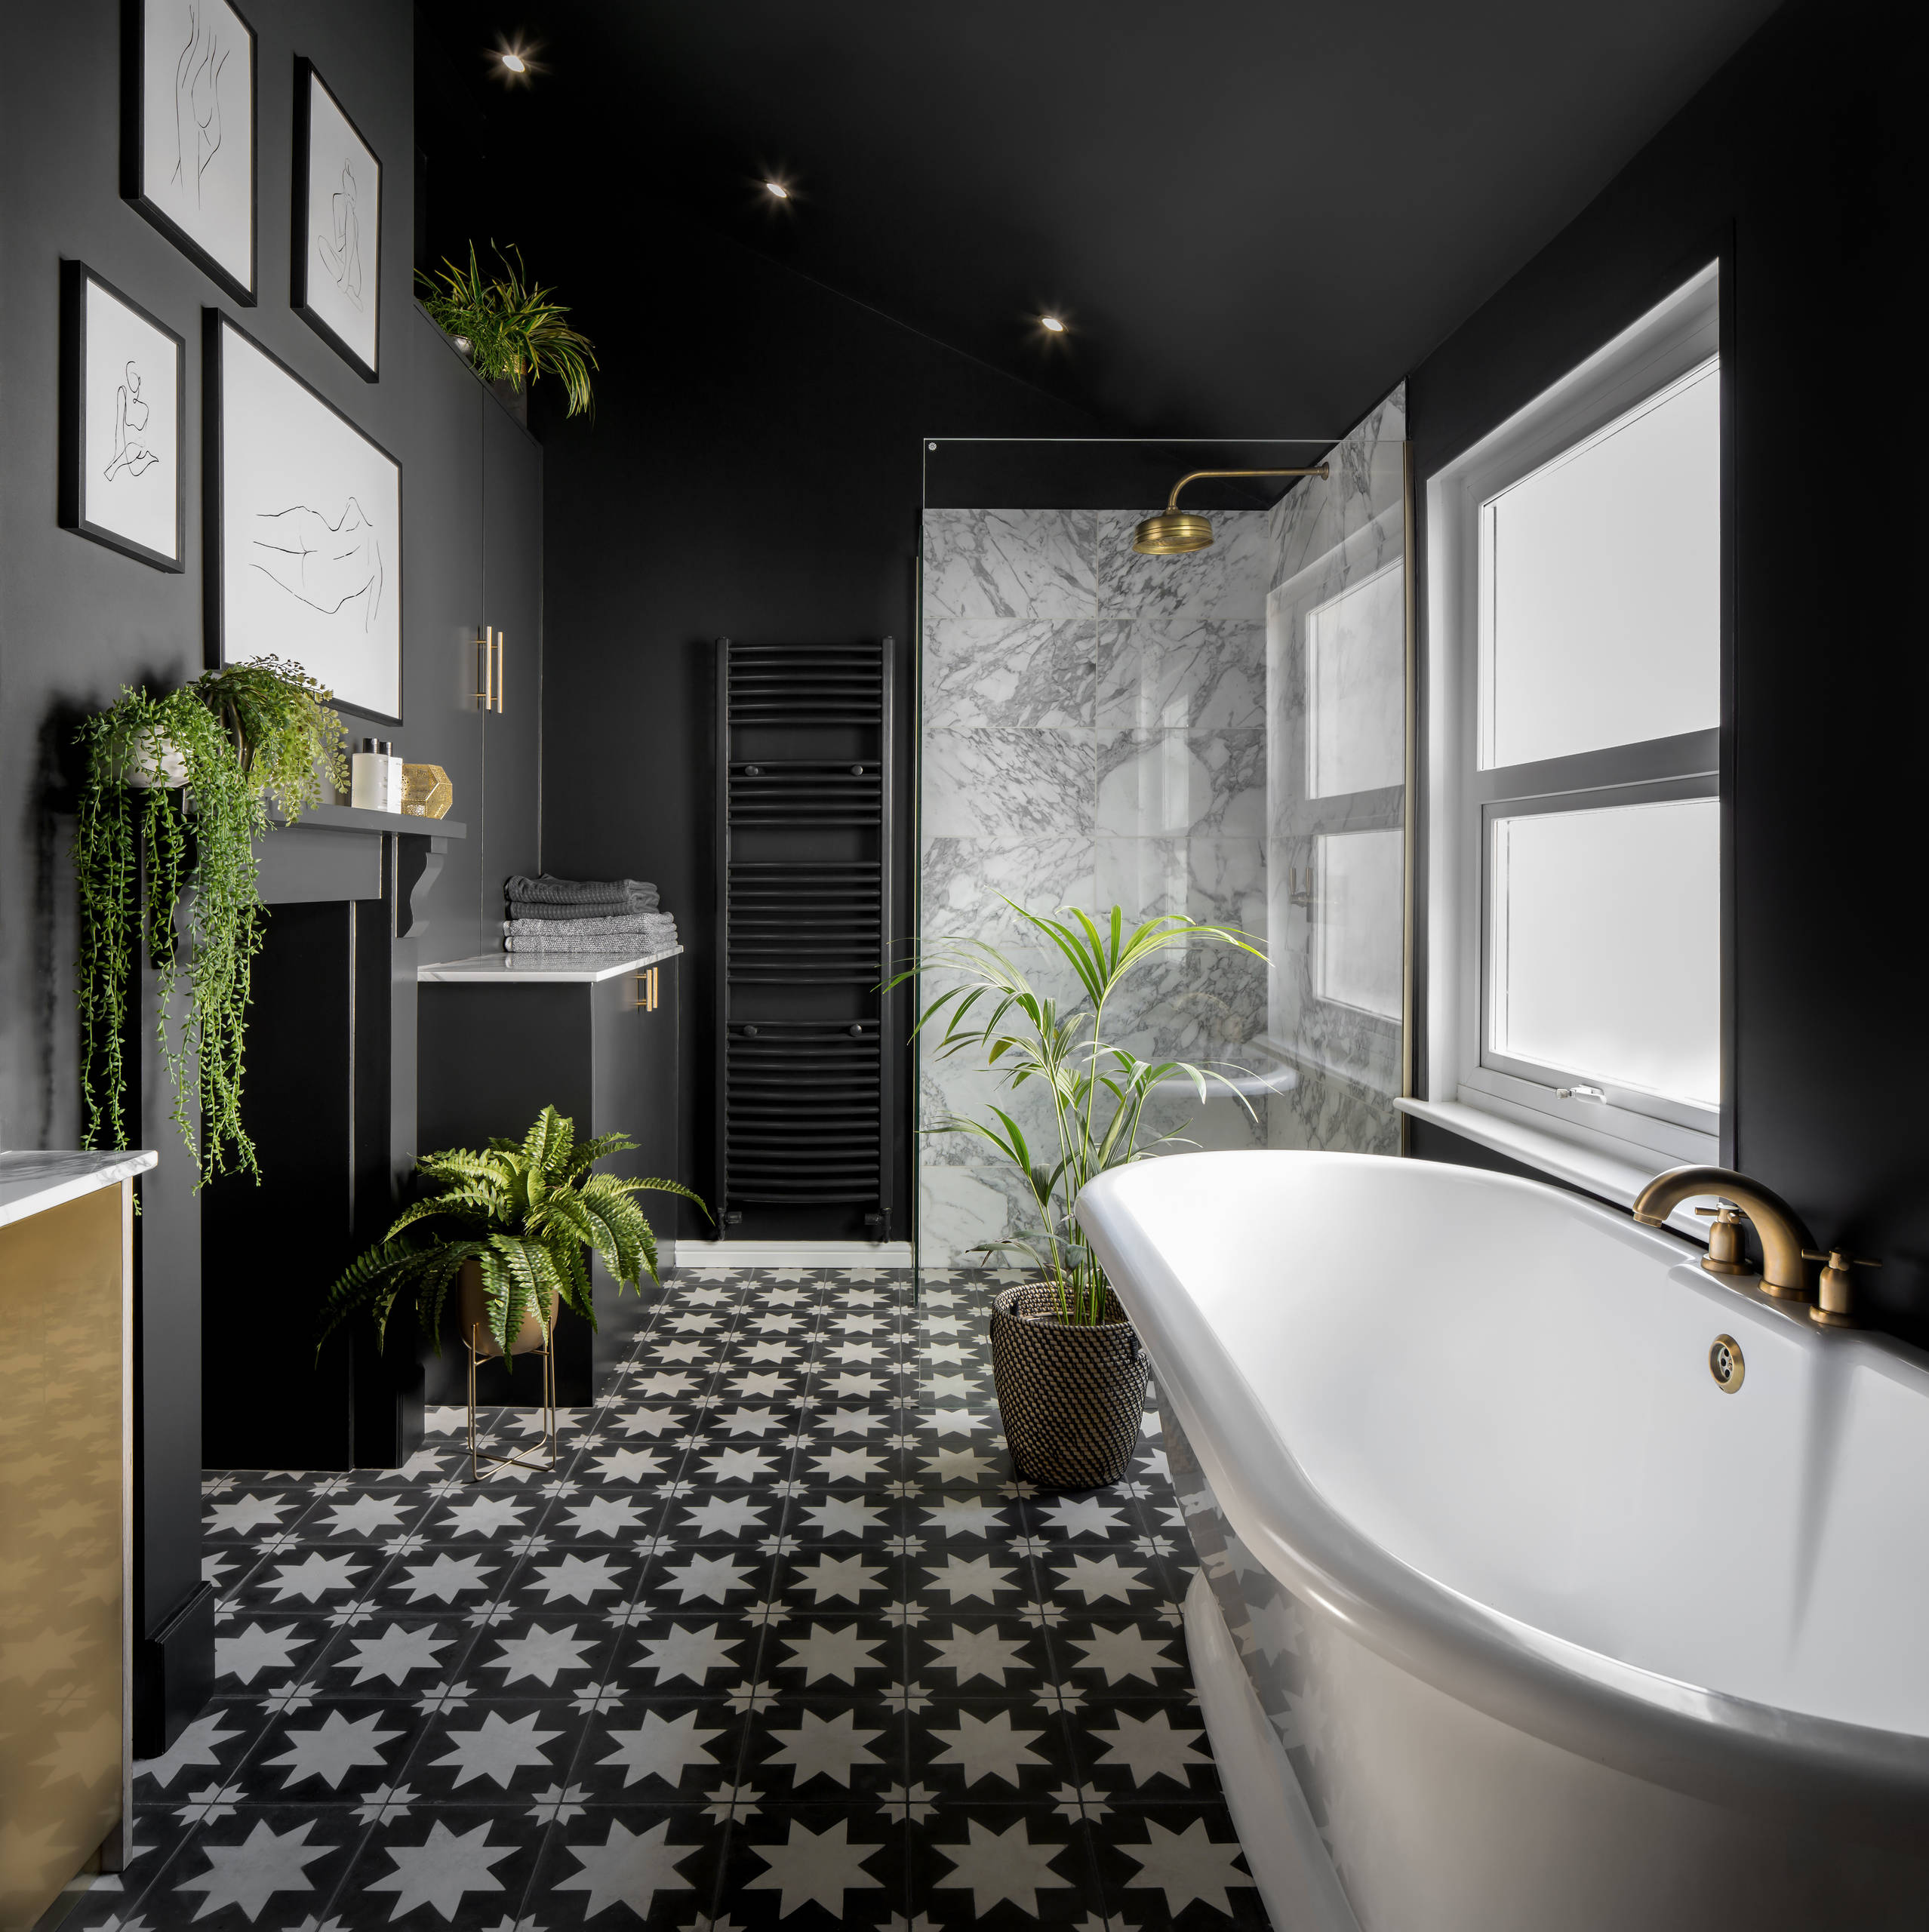 Cost Of Your Bathroom Renovation, How To Renovate A Bathroom On Budget Uk